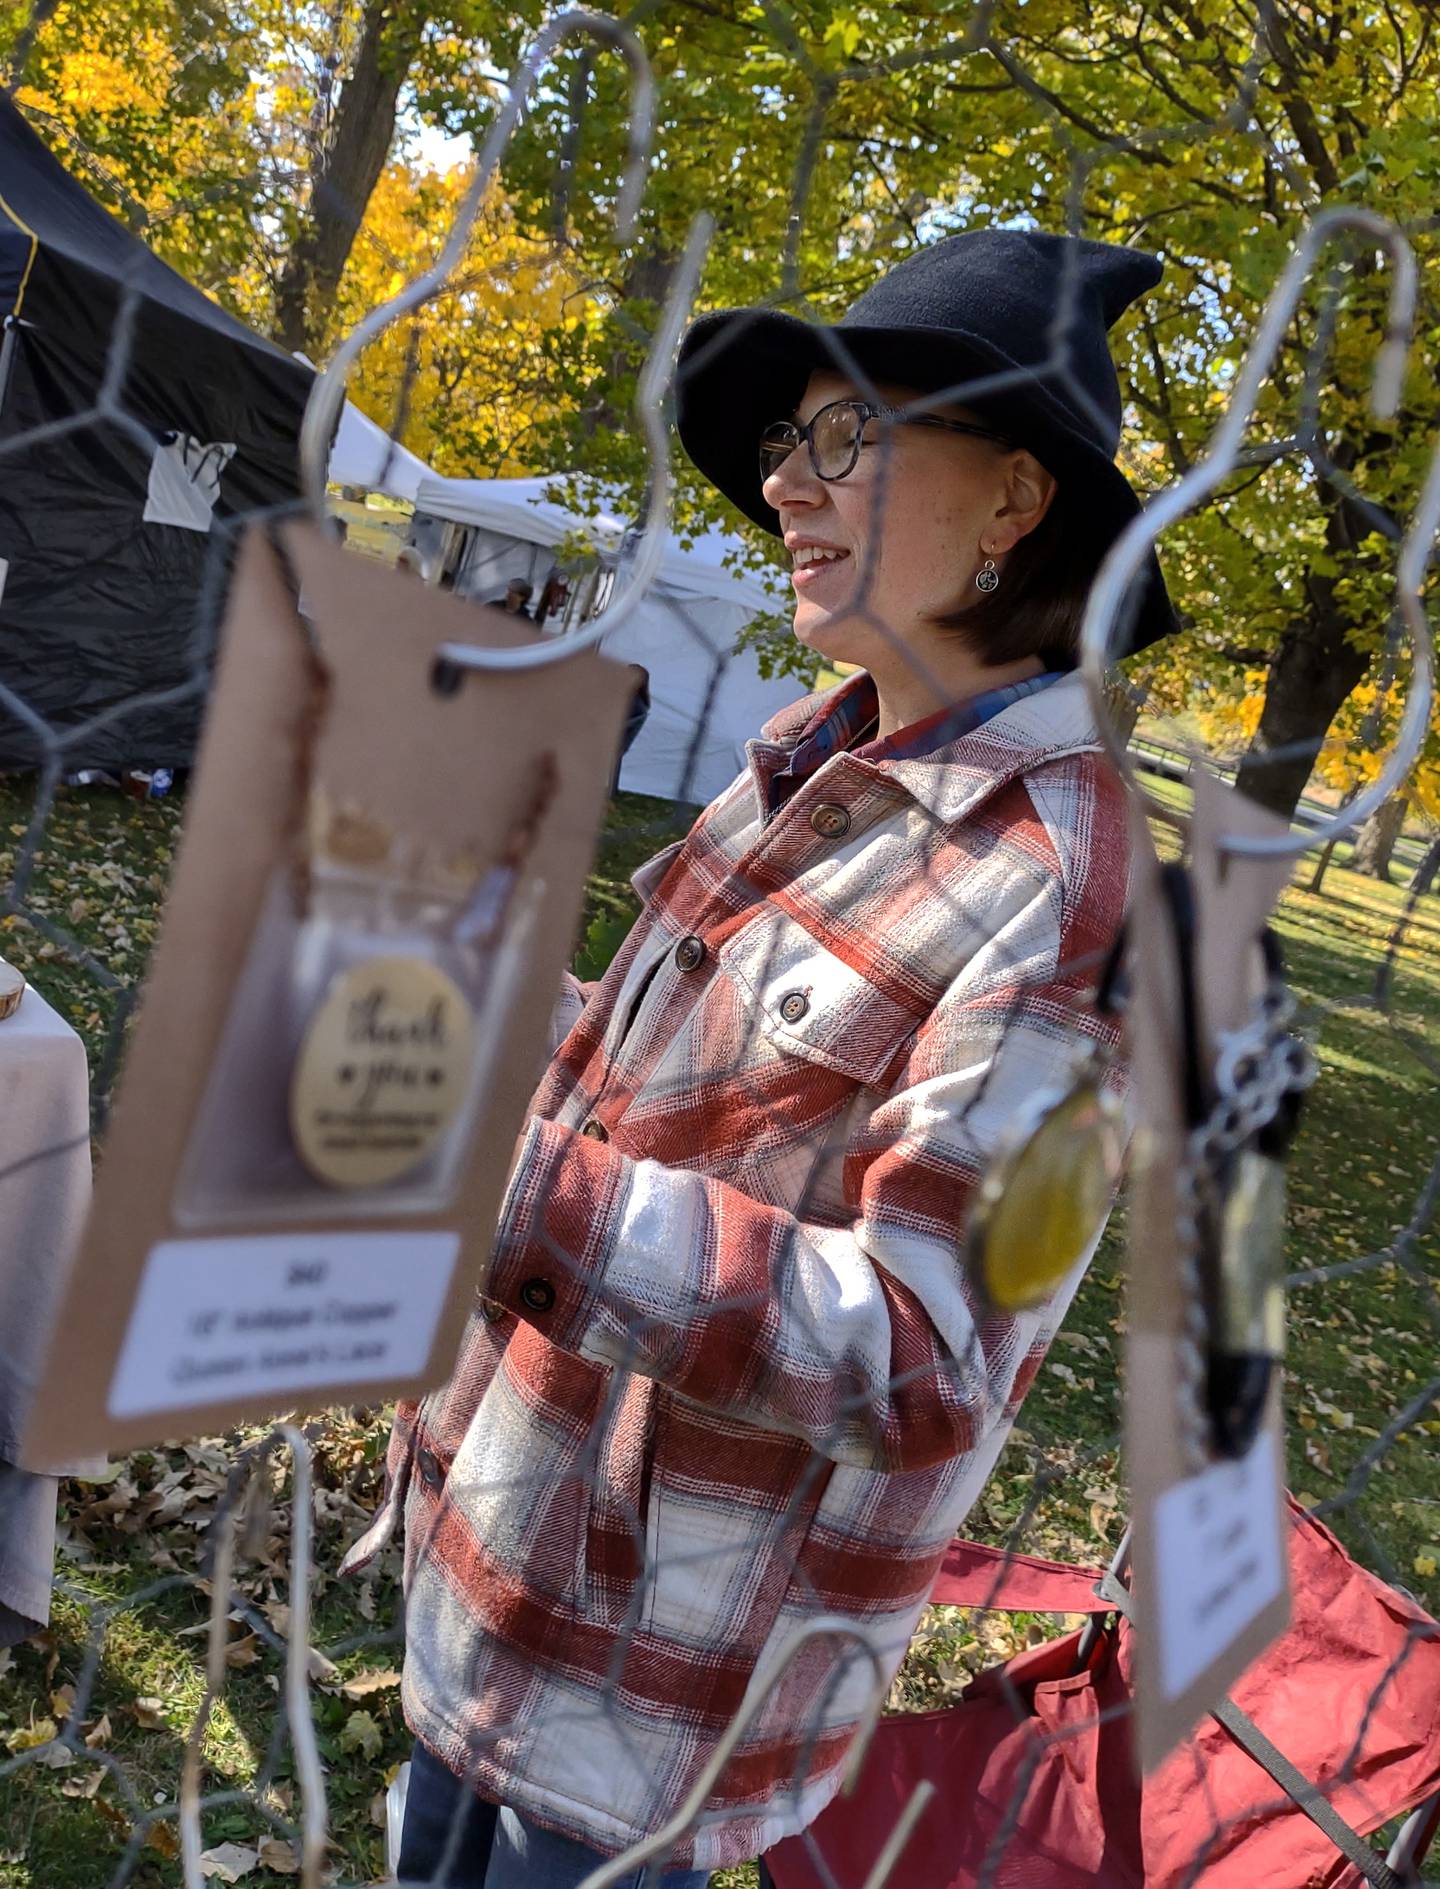 Tori Eisenberg of Sheridan tells customers about her handmade floral resin jewelry, which she sold Saturday, Oct. 22, 2022, at the Witches Day Out market at Pitstick Pavilion in Ottawa.